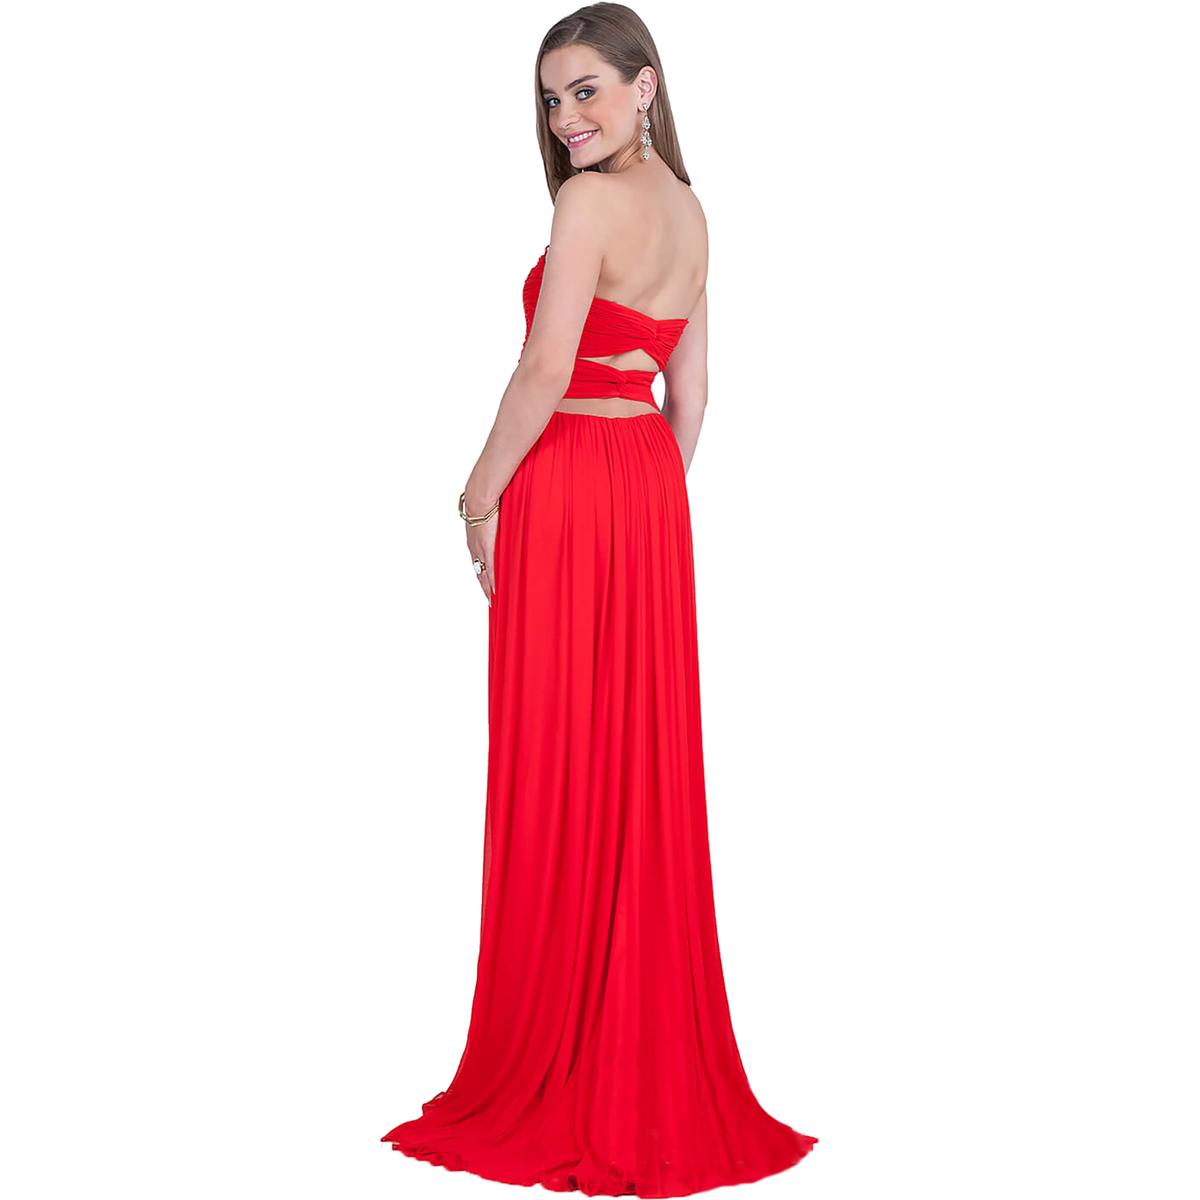 Terani Couture Strapless Open Back Prom Formal Dress Gown BHFO 0175 